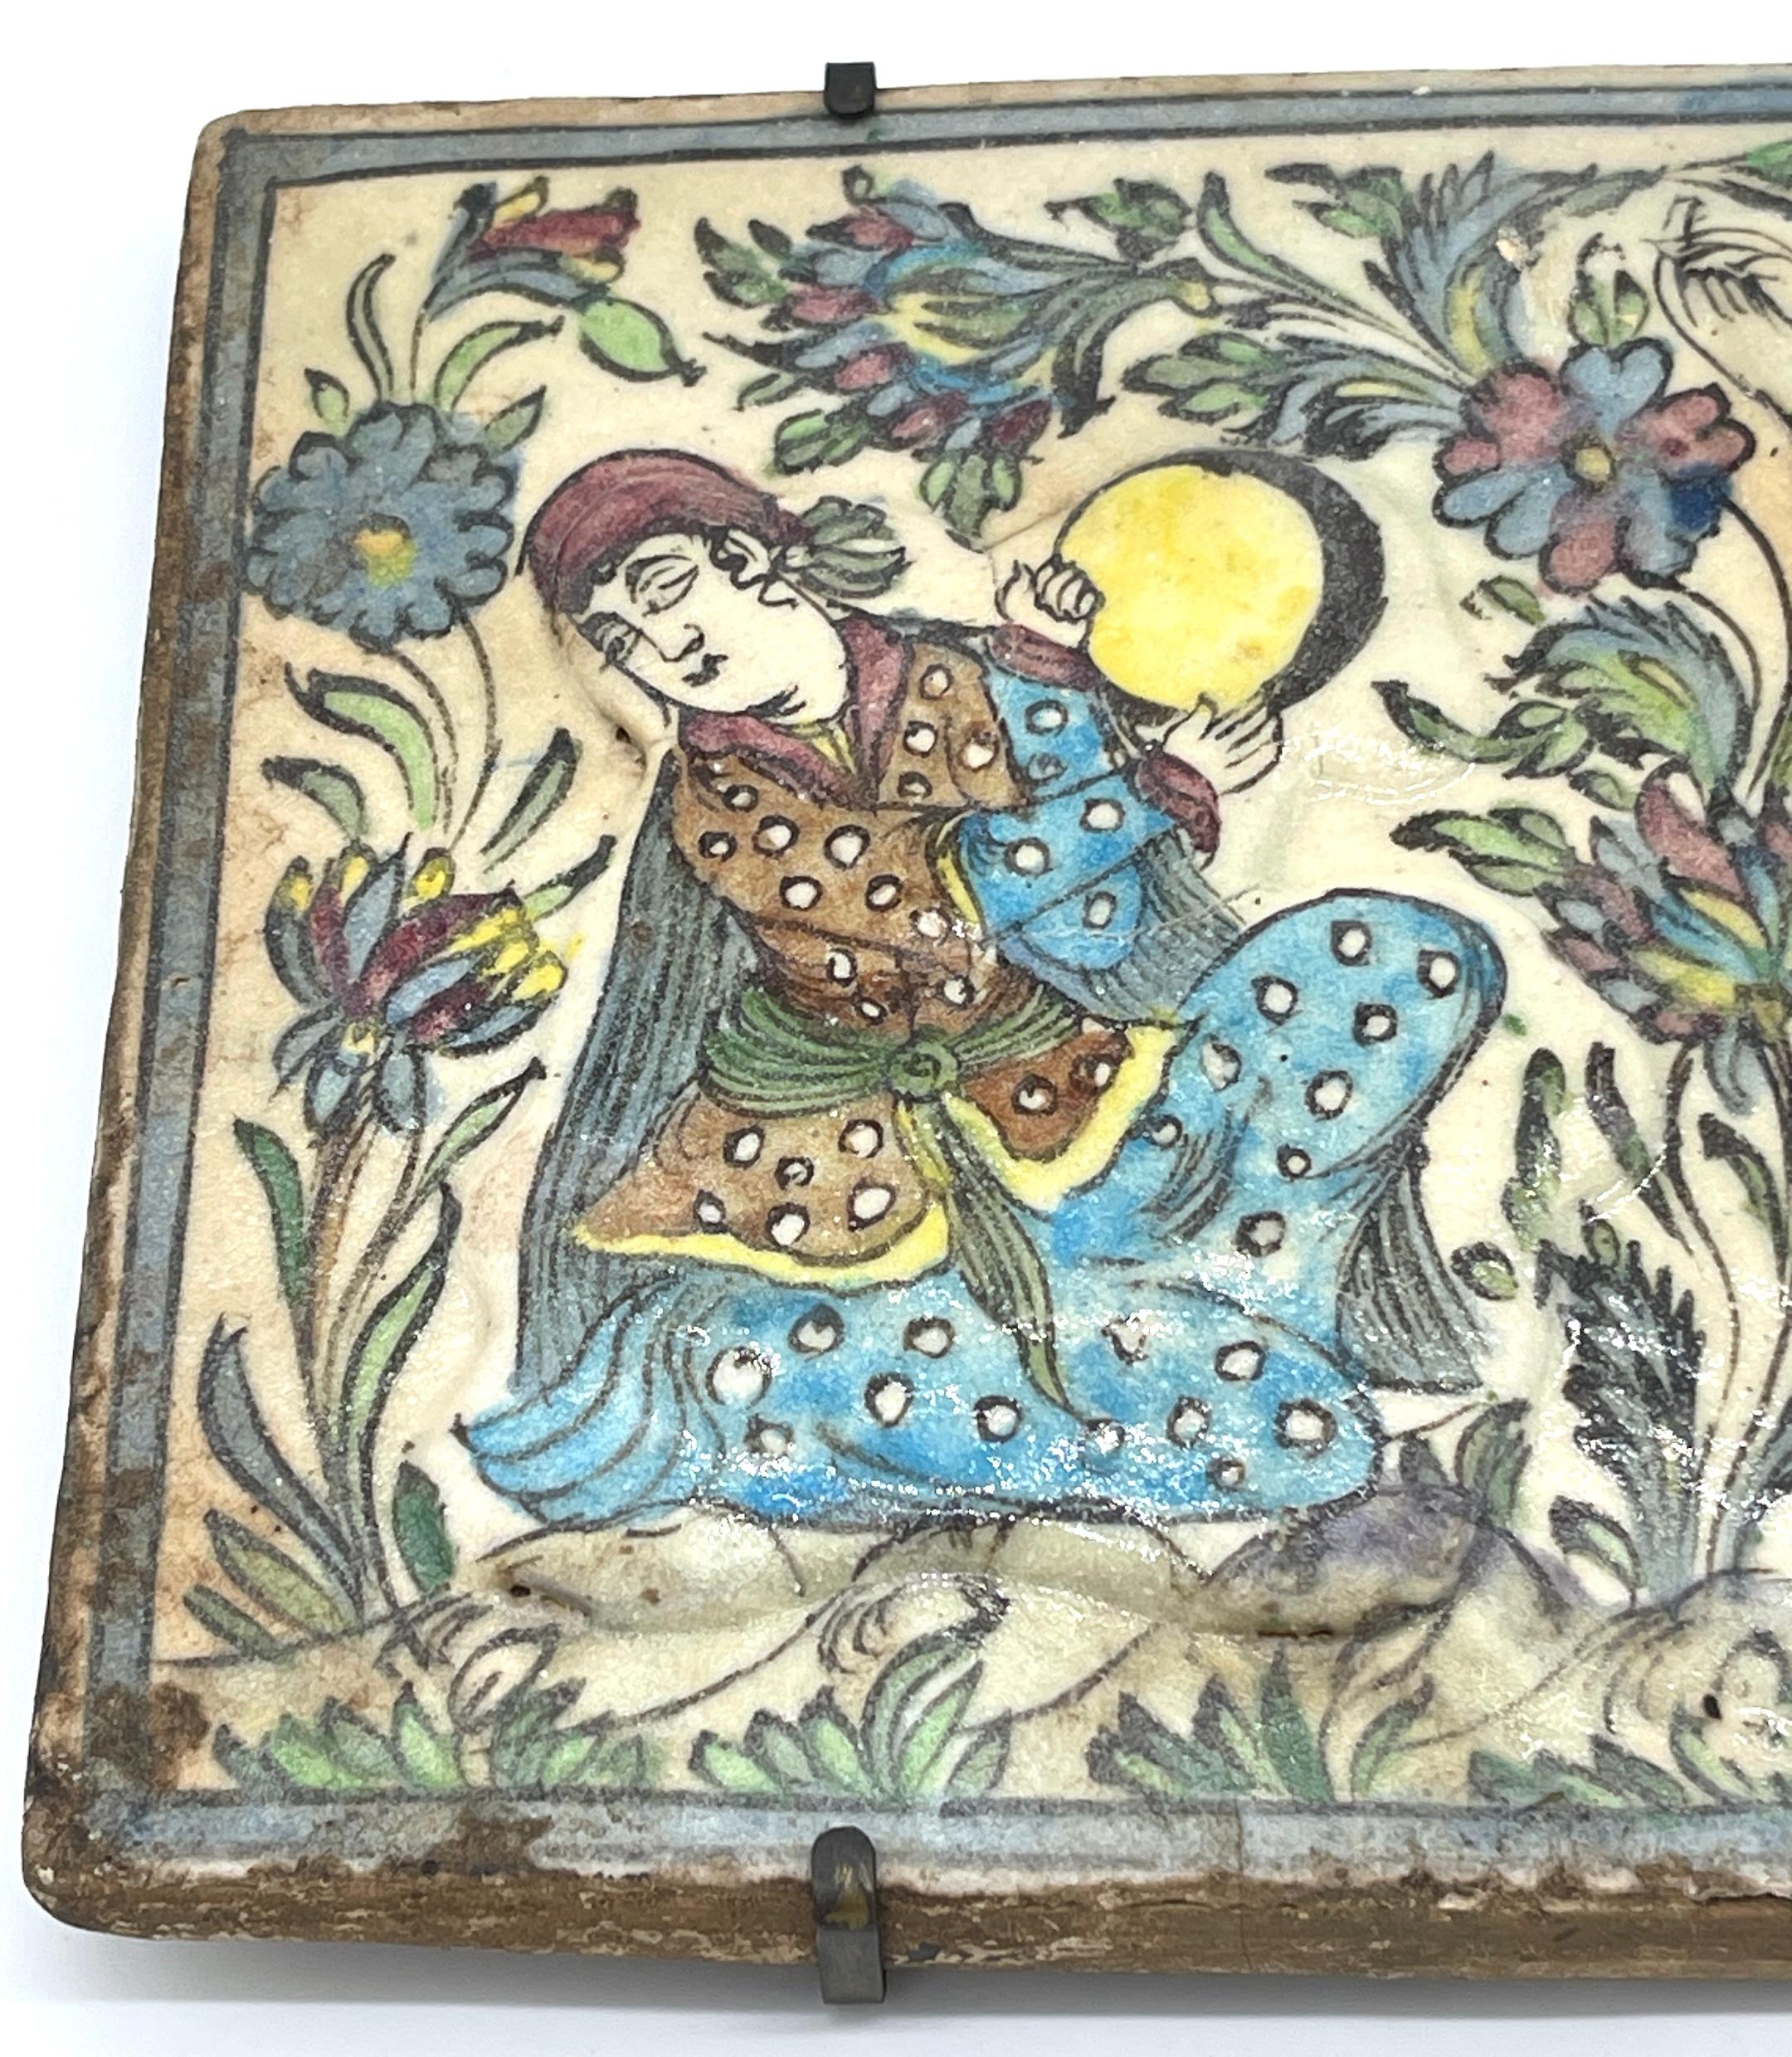 Enameled Large 19th Century Iznik Pottery Pictorial Tile 'Maidens in Garden' For Sale